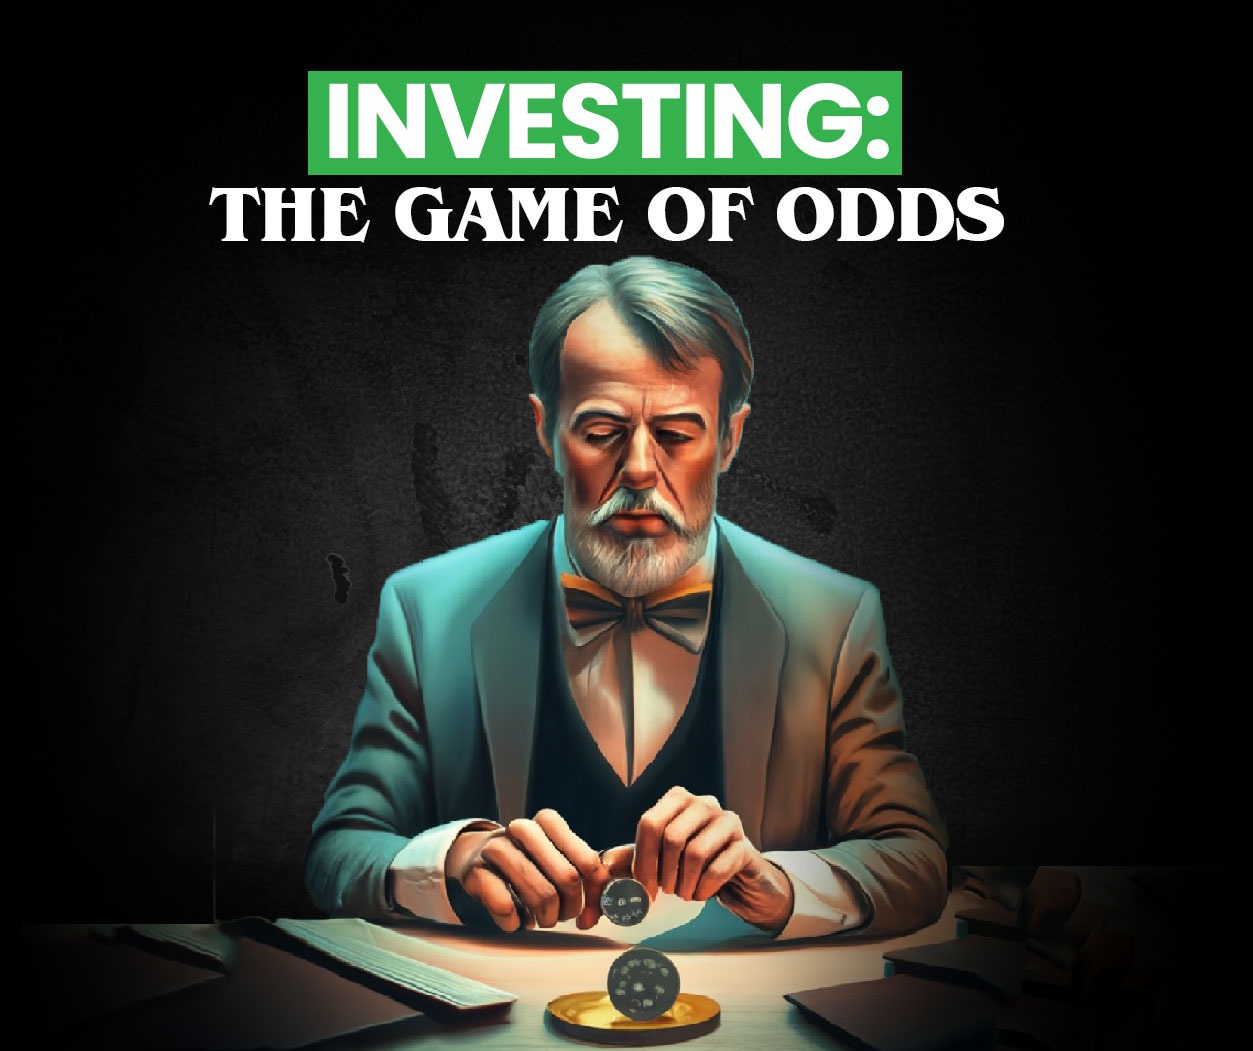 Investing: The Game of Odds